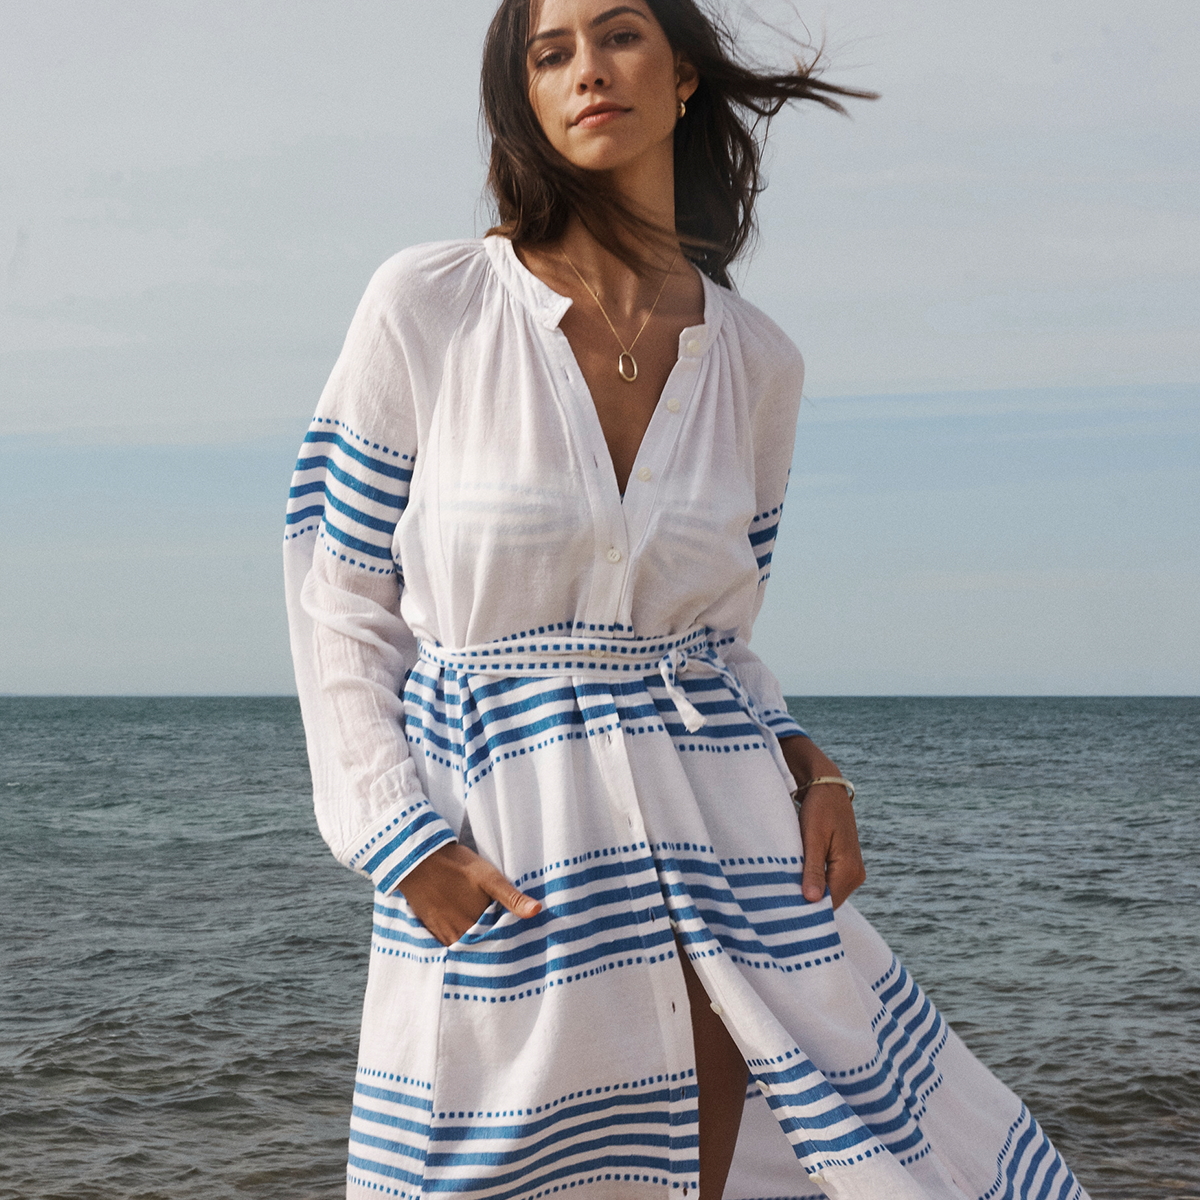 Woman standing on the beach wearing a long white and blue lemlem dress.